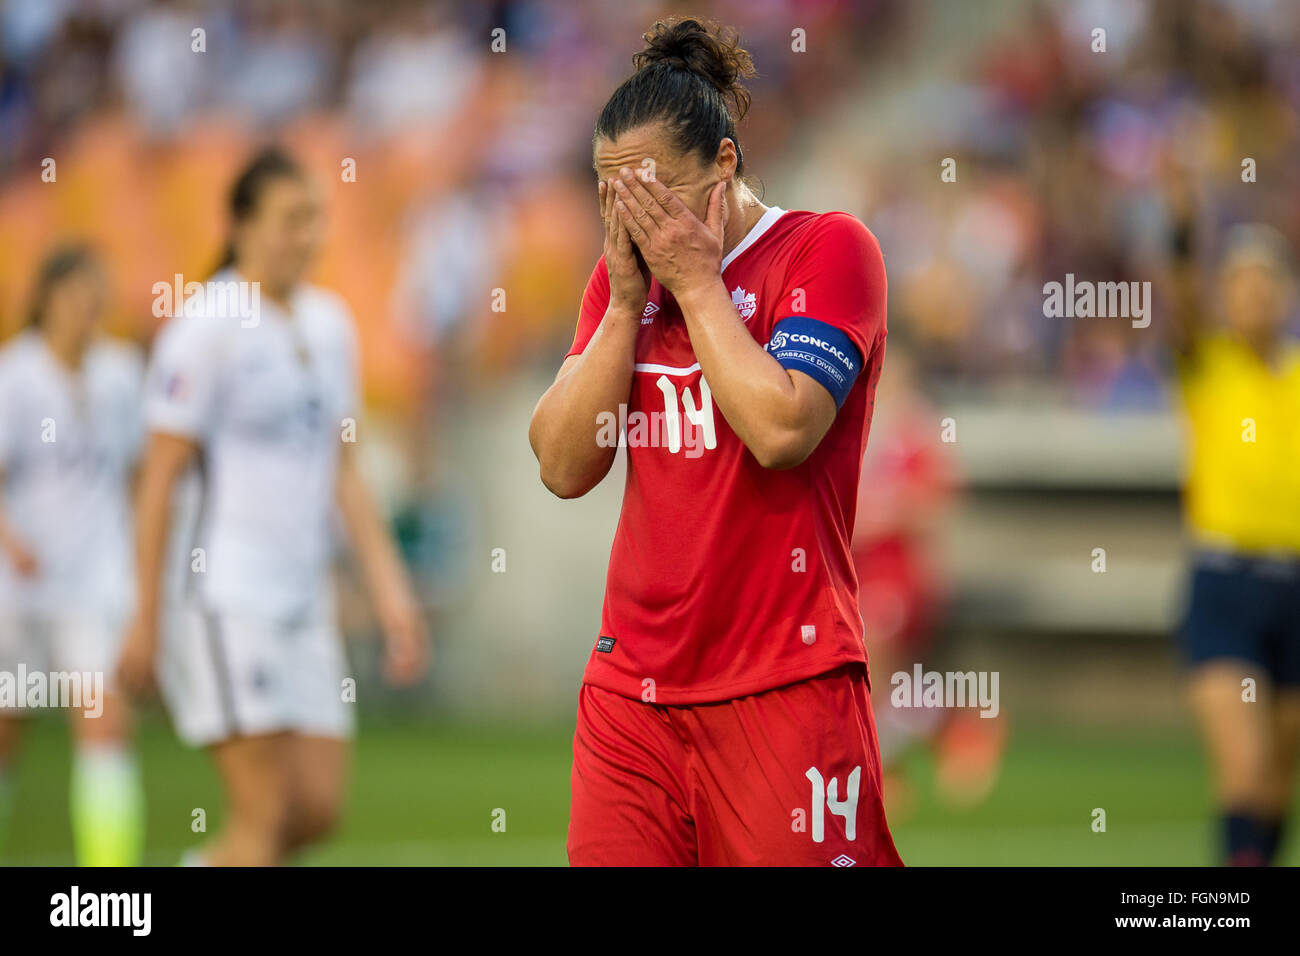 Houston, TX, USA. 21st Feb, 2016. Canada forward Melissa Tancredi (14) reacts after missing a goal during the Final match of the CONCACAF Olympic Qualifying tournament between Canada and the USA at BBVA Compass Stadium in Houston, TX. USA won 2-0.Trask Smith/CSM/Alamy Live News Stock Photo